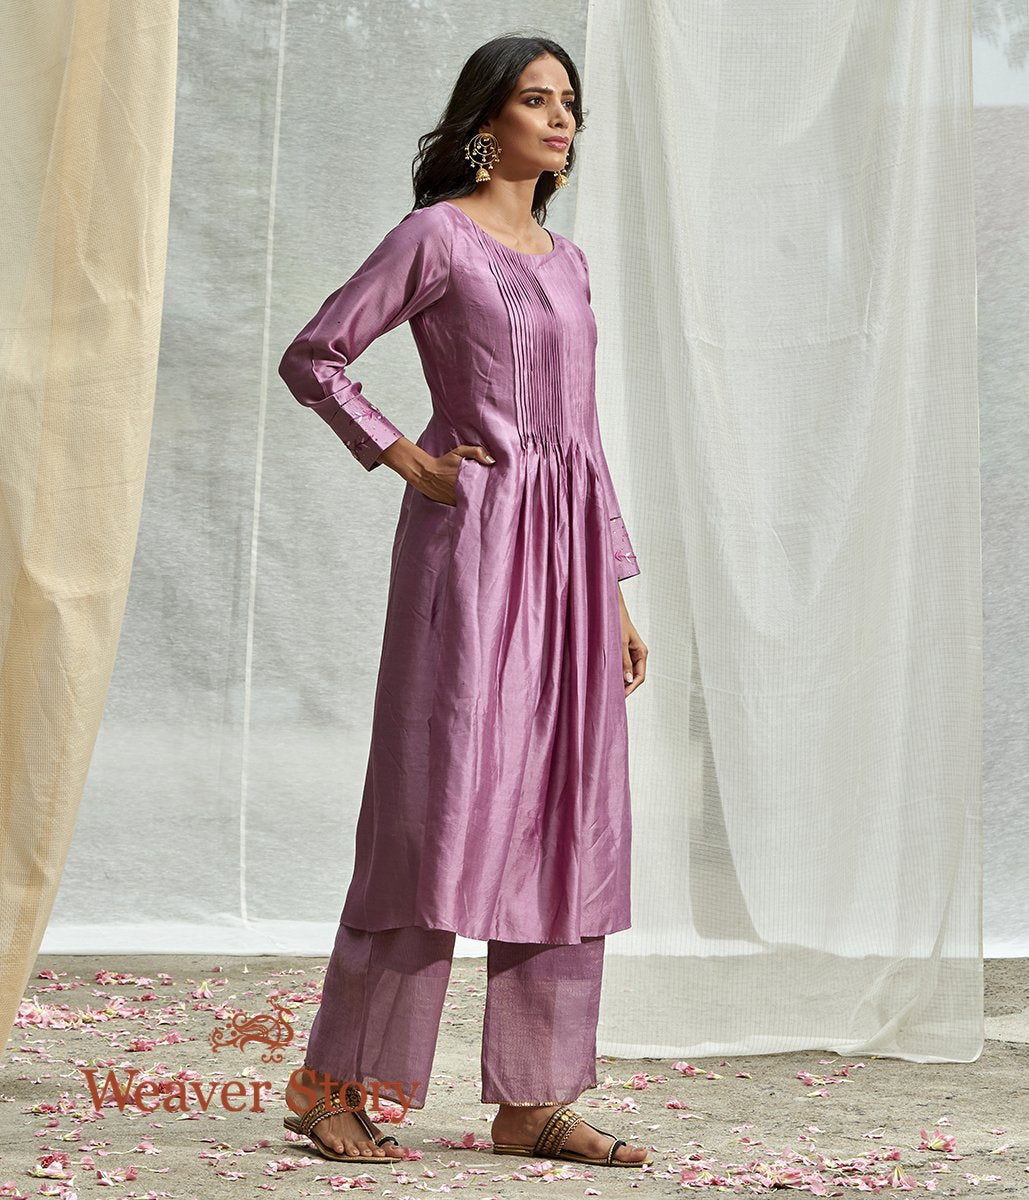 Handwoven_Purple_Front_Pintex_Tunic_with_Embroidered_Cuffs_with_Purple_Striped_Pants_WeaverStory_03